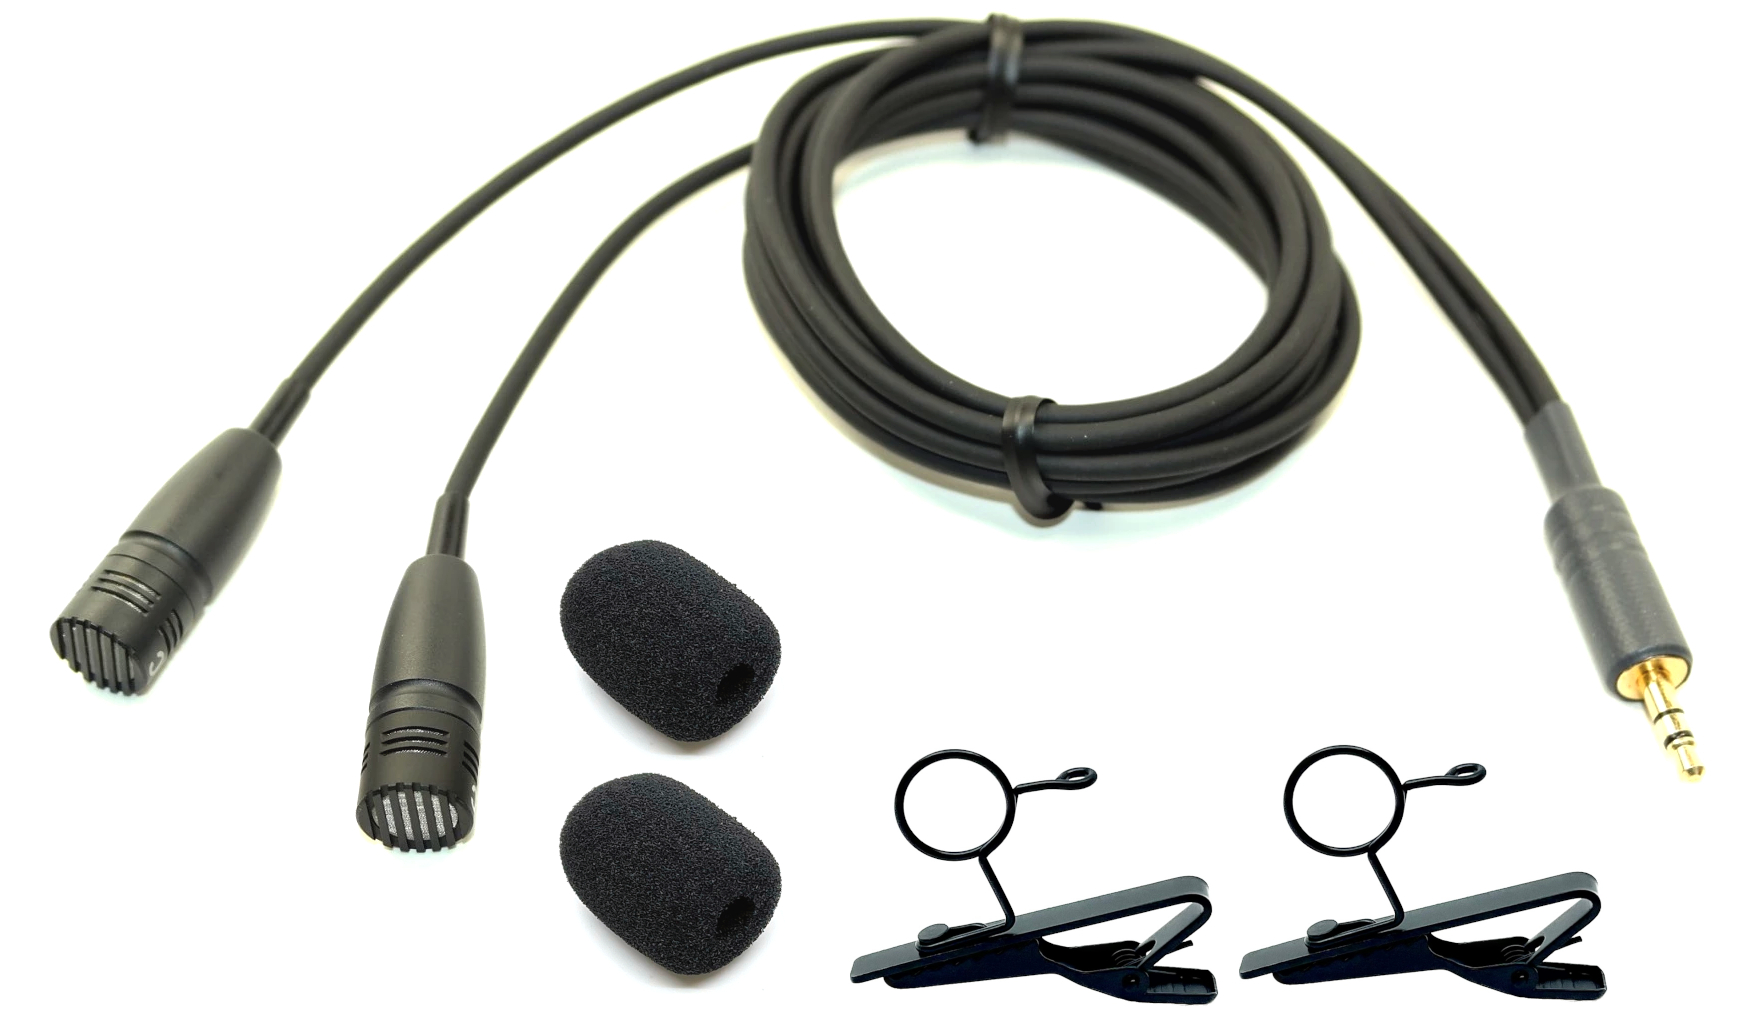 MINIATURE CARDIOID (UNIDIRECTIONAL) MICROPHONES - The Sound